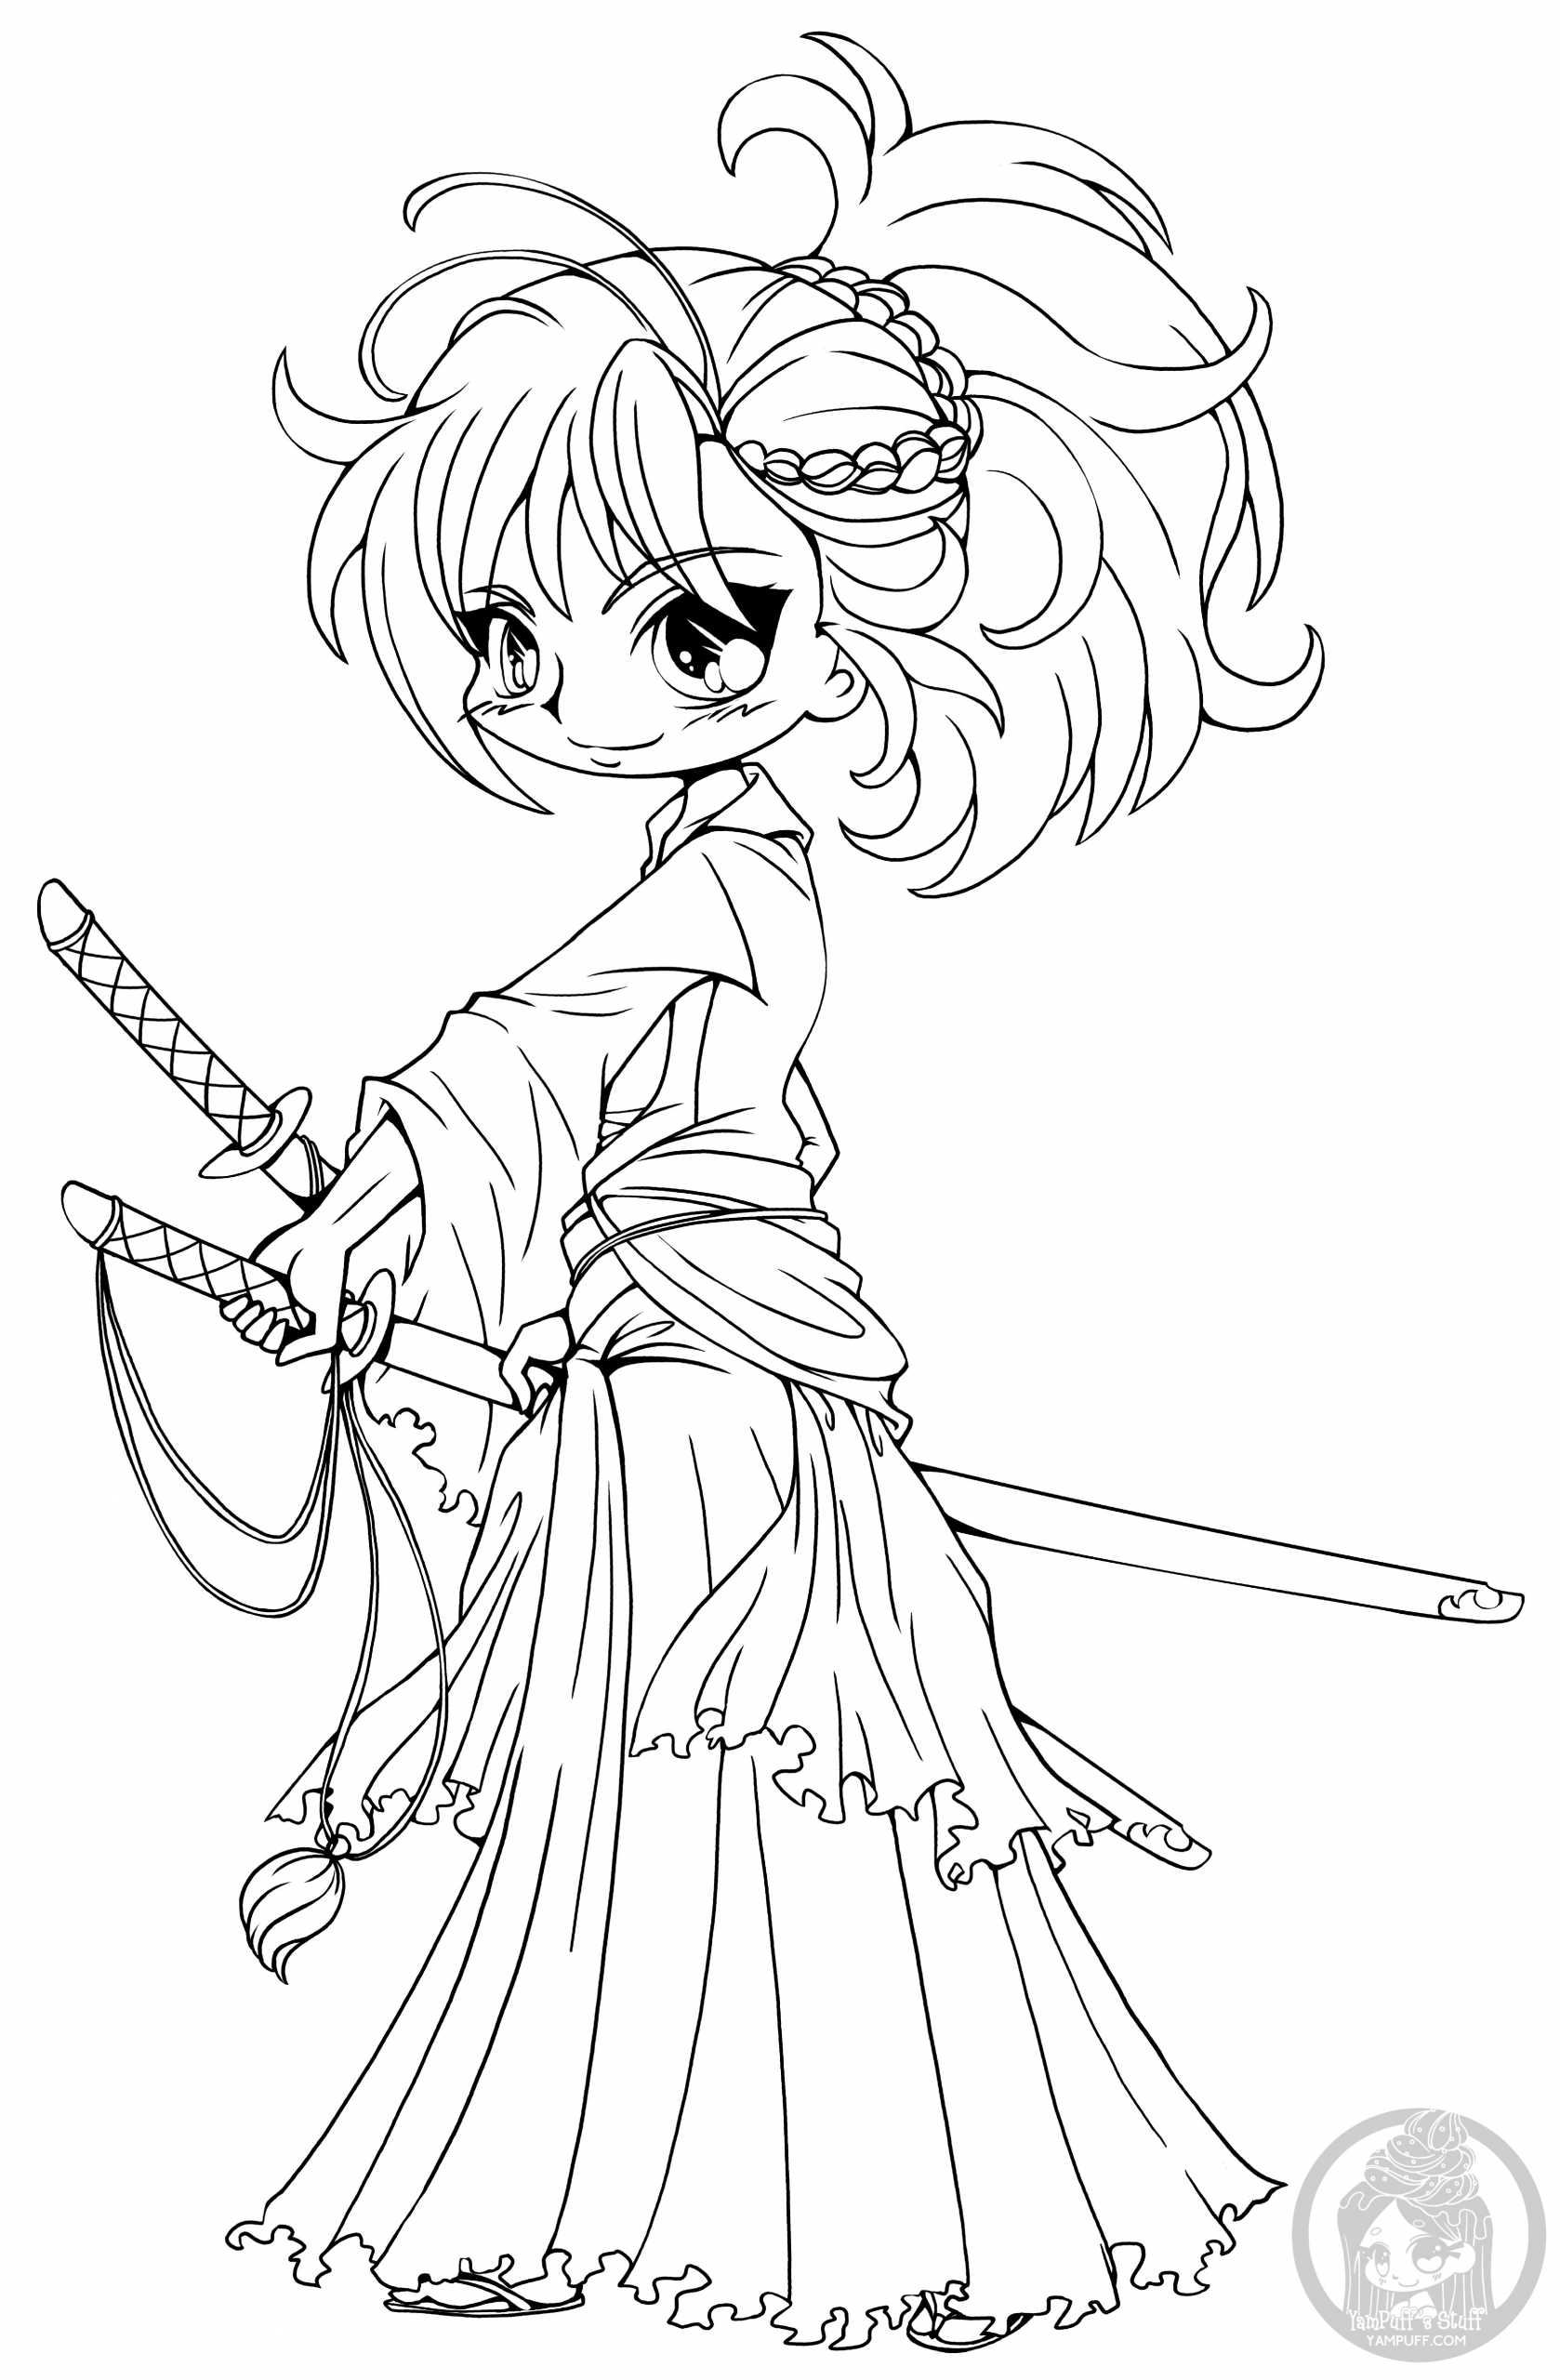 Chibi Girls Coloring Pages
 Fanart Free Chibi Colouring Pages • YamPuff s Stuff